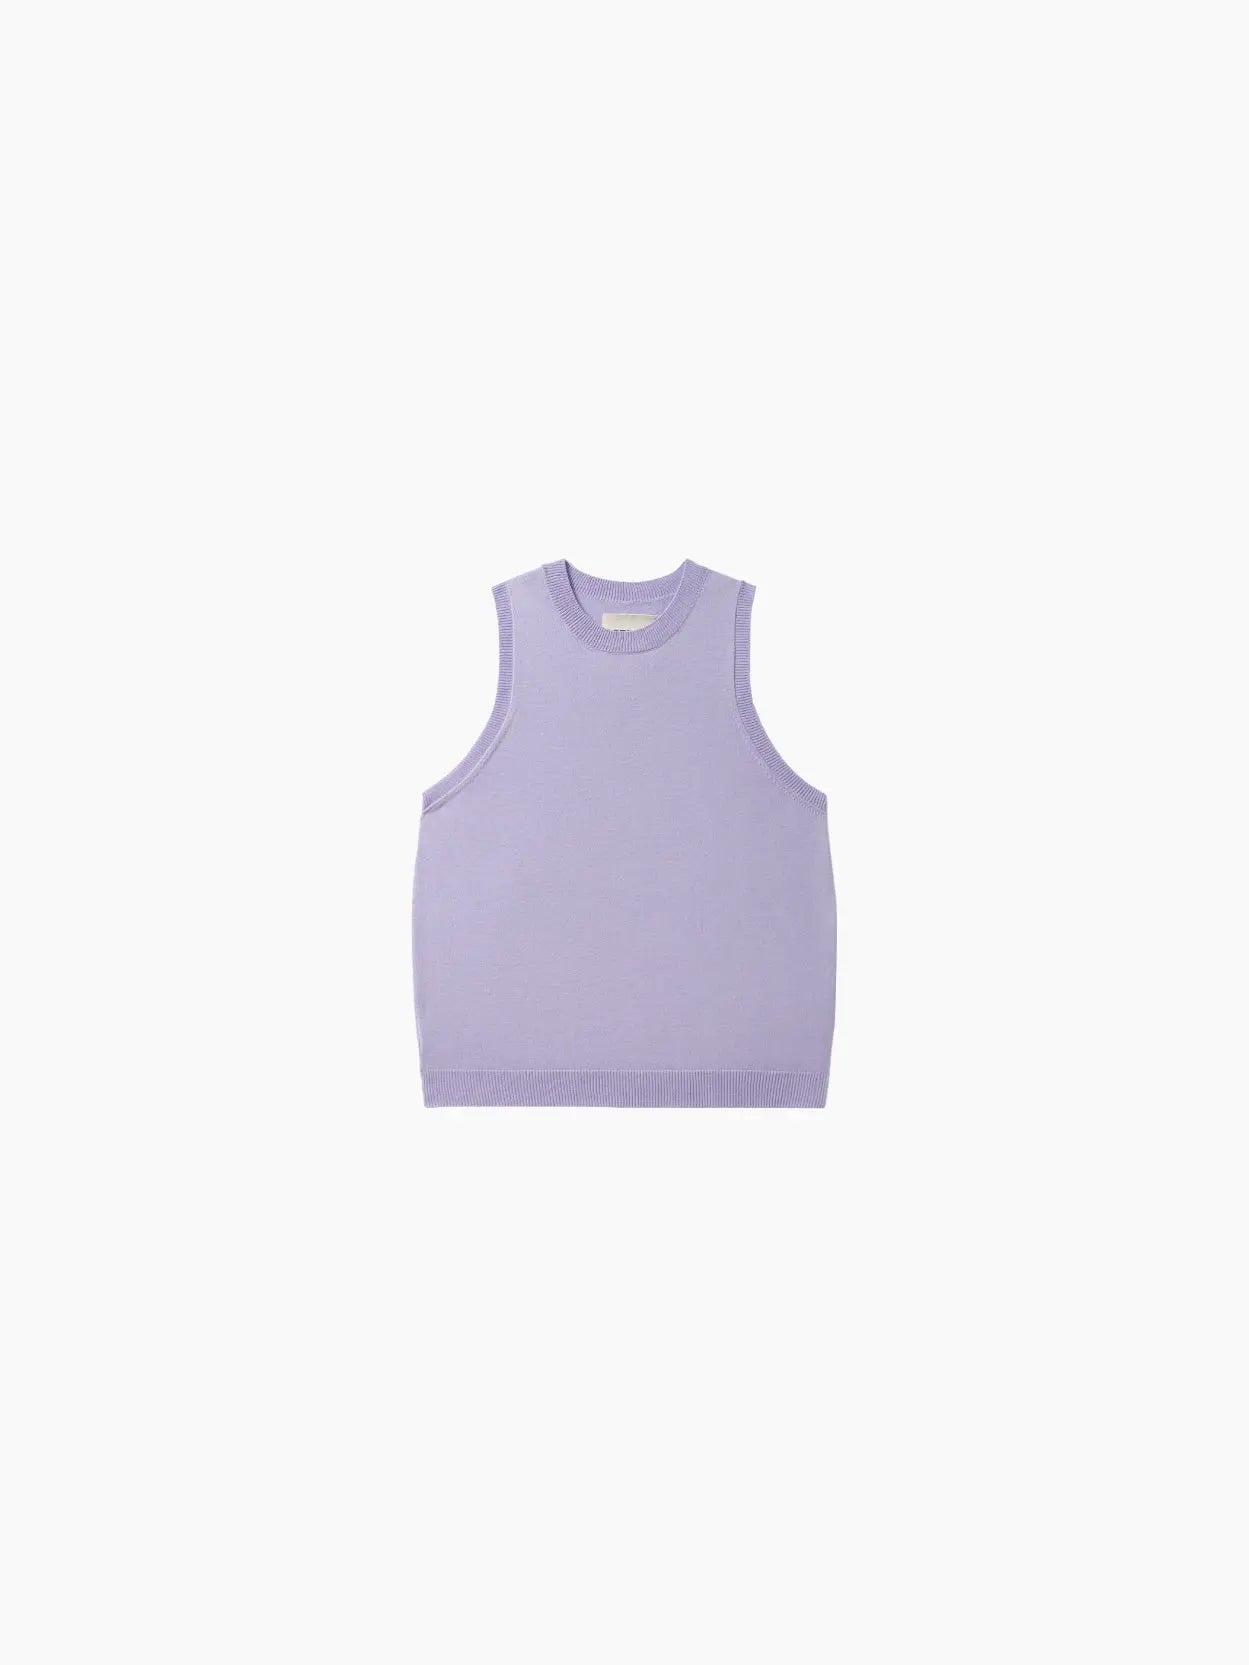 A Cotton Tank Top Cardo from Cordera is centered against a plain white background. The tank top has a simple, classic design with a crew neckline and ribbed trim on the neck, armholes, and hem. Perfect for adding a touch of Barcelona-inspired style to any outfit.